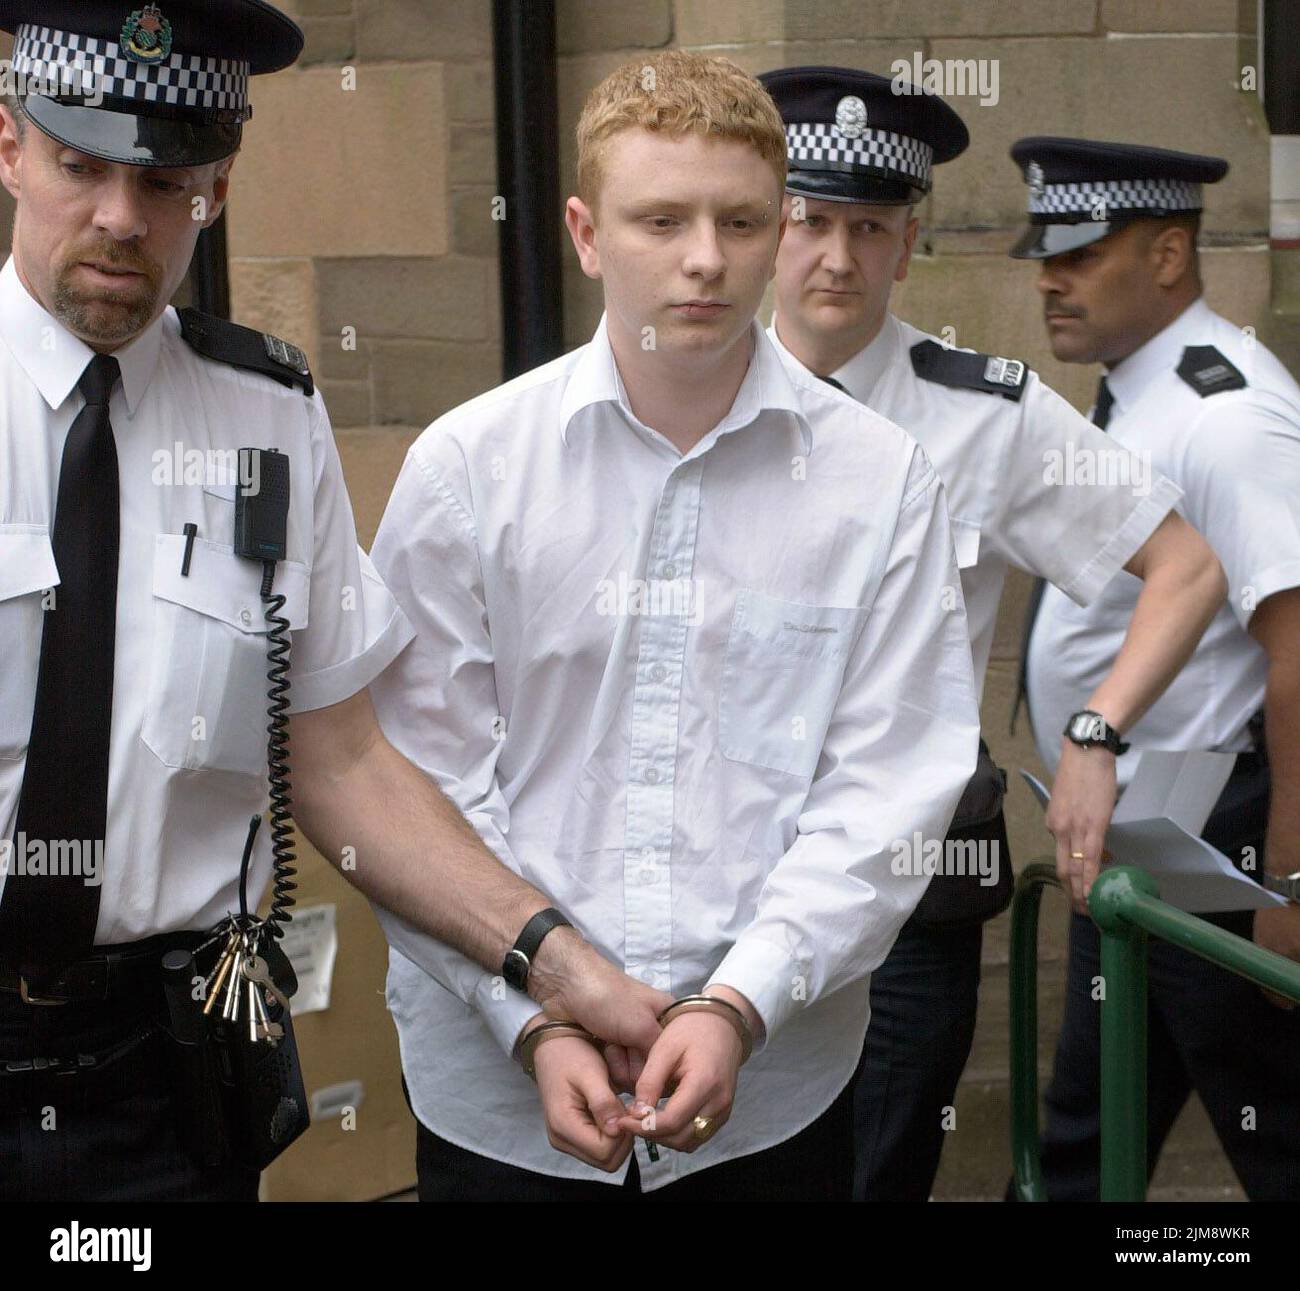 File photo dated 17/04/02 of Robbie McIntosh, 16, being led away from Forfar Sheriff Court, Forfar, after he was found guilty of stabbing 34-year-old Anne Nicoll to death as she walked her dog in Law Hill, Dundee. Linda McDonald, who was battered with a dumbbell by the murderer who was out on home leave, has said she 'doesn't even feel angry' towards her attacker. Ms McDonald has ssaid she forgives Robbie McIntosh for assaulting her as she walked her dog in Dundee's Templeton Wood in August 2017. Issue date: Friday August 5, 2022. Stock Photo